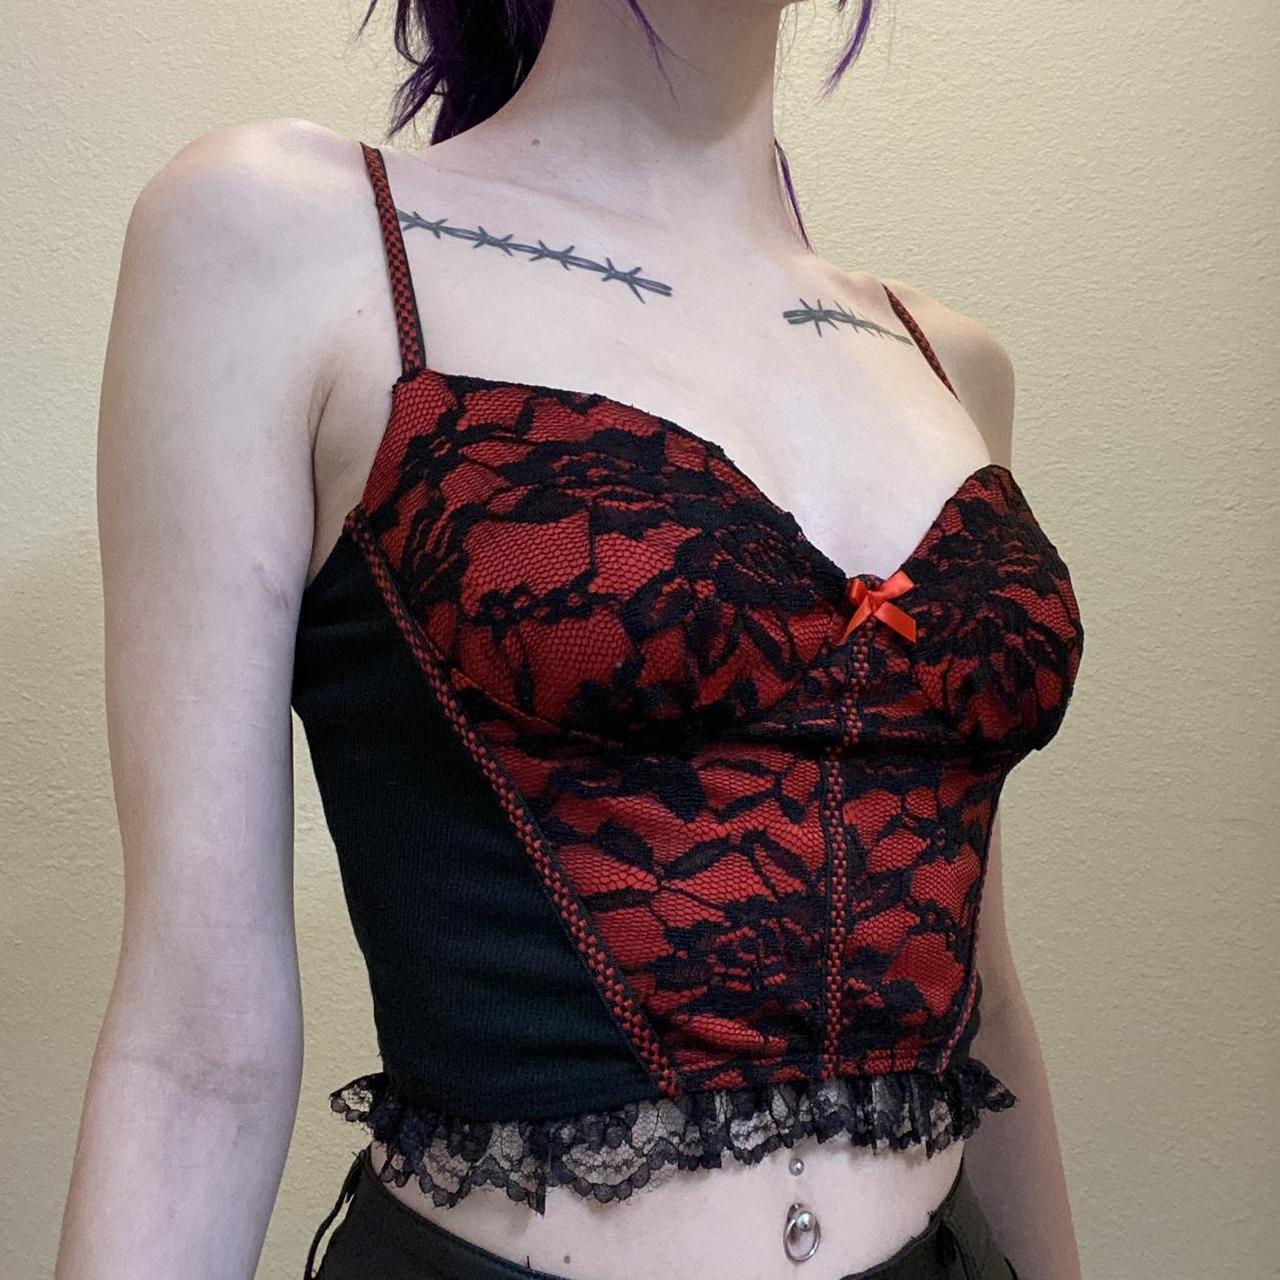 Women's Black and Red Crop-top (2)